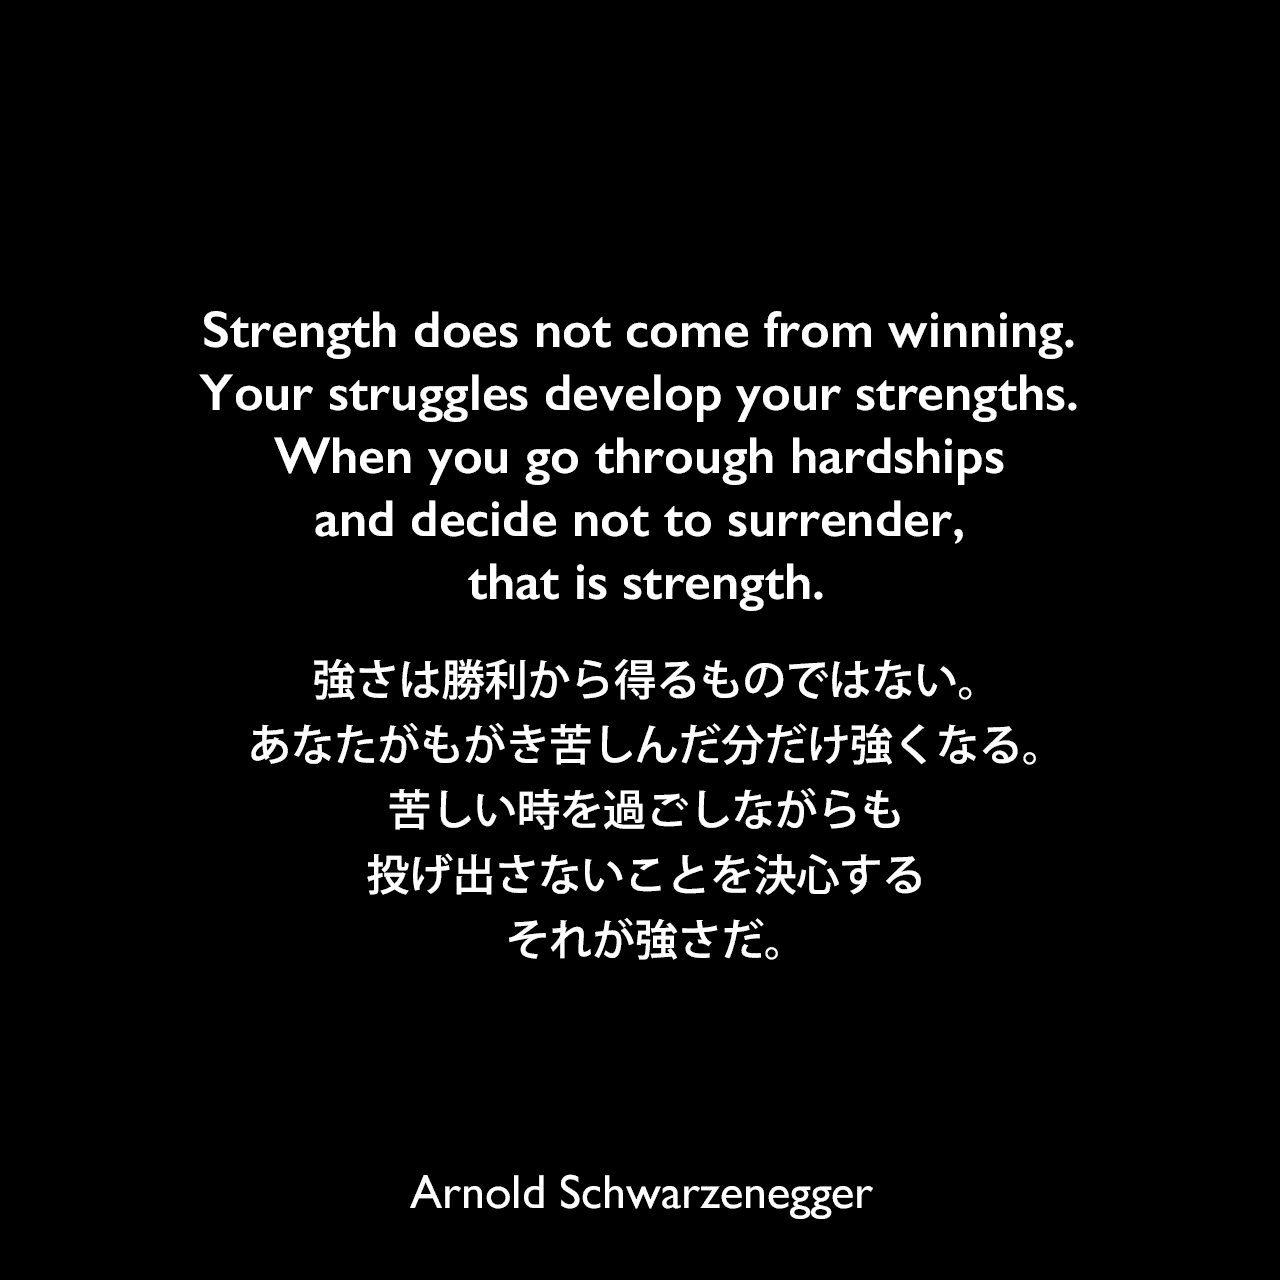 Strength does not come from winning. Your struggles develop your strengths. When you go through hardships and decide not to surrender, that is strength.強さは勝利から得るものではない。あなたがもがき苦しんだ分だけ強くなる。苦しい時を過ごしながらも投げ出さないことを決心する、それが強さだ。Arnold Schwarzenegger